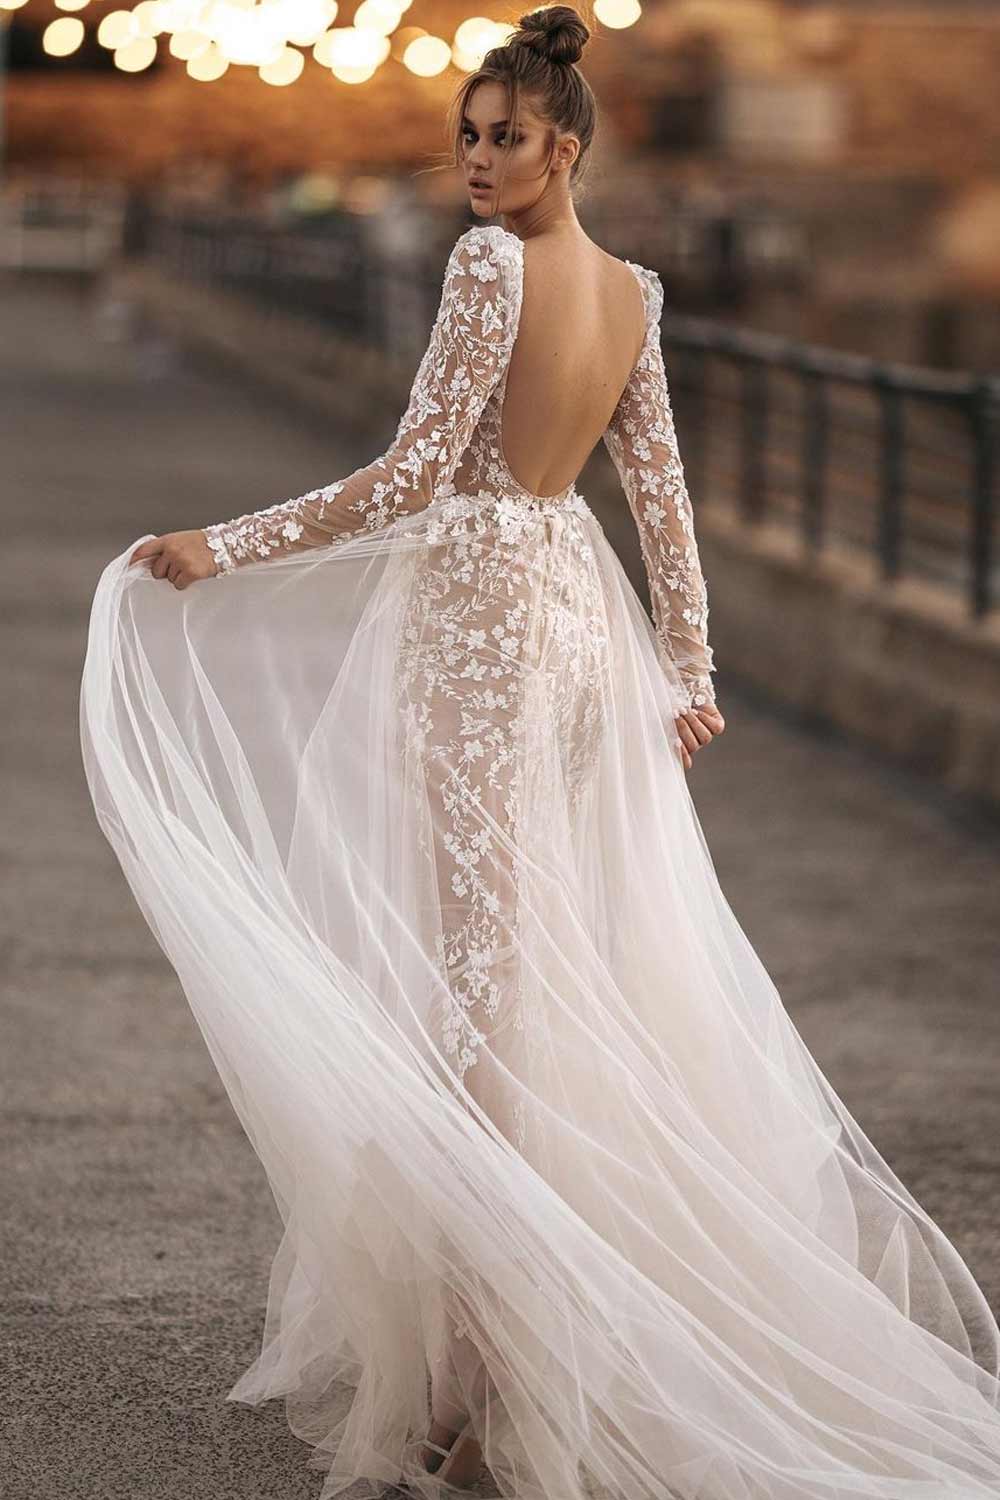 Long Sleeved Wedding Dress with an Open Back